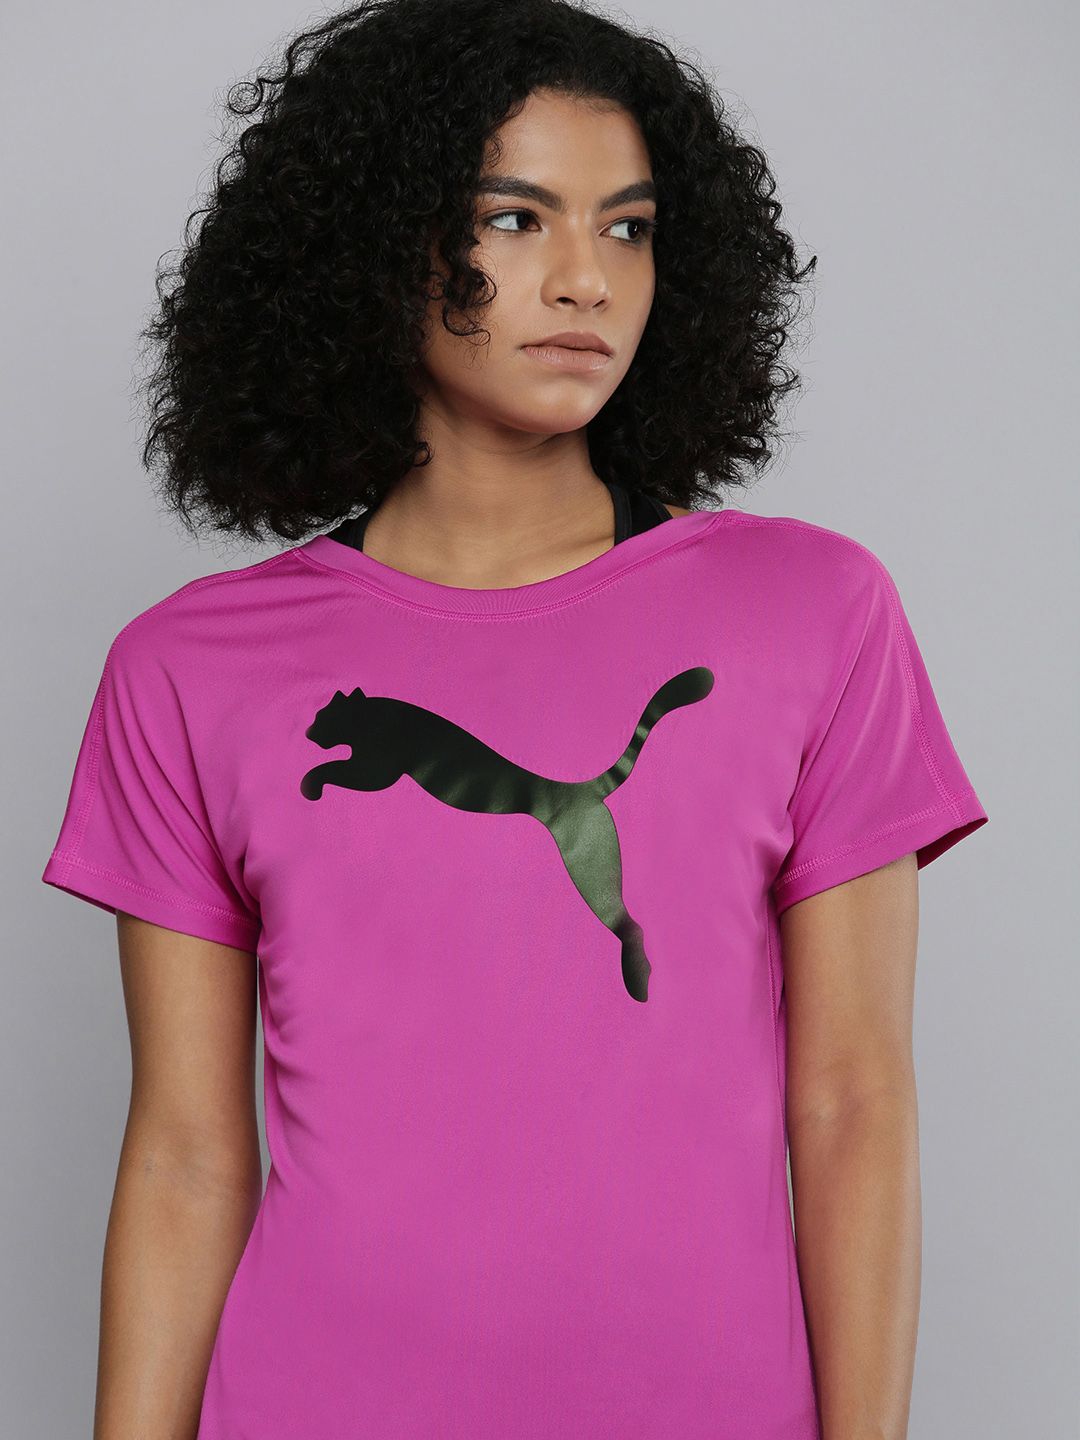 Puma Women Magenta & Black Brand Logo Printed dryCELL Relaxed Fit Training T-shirt Price in India